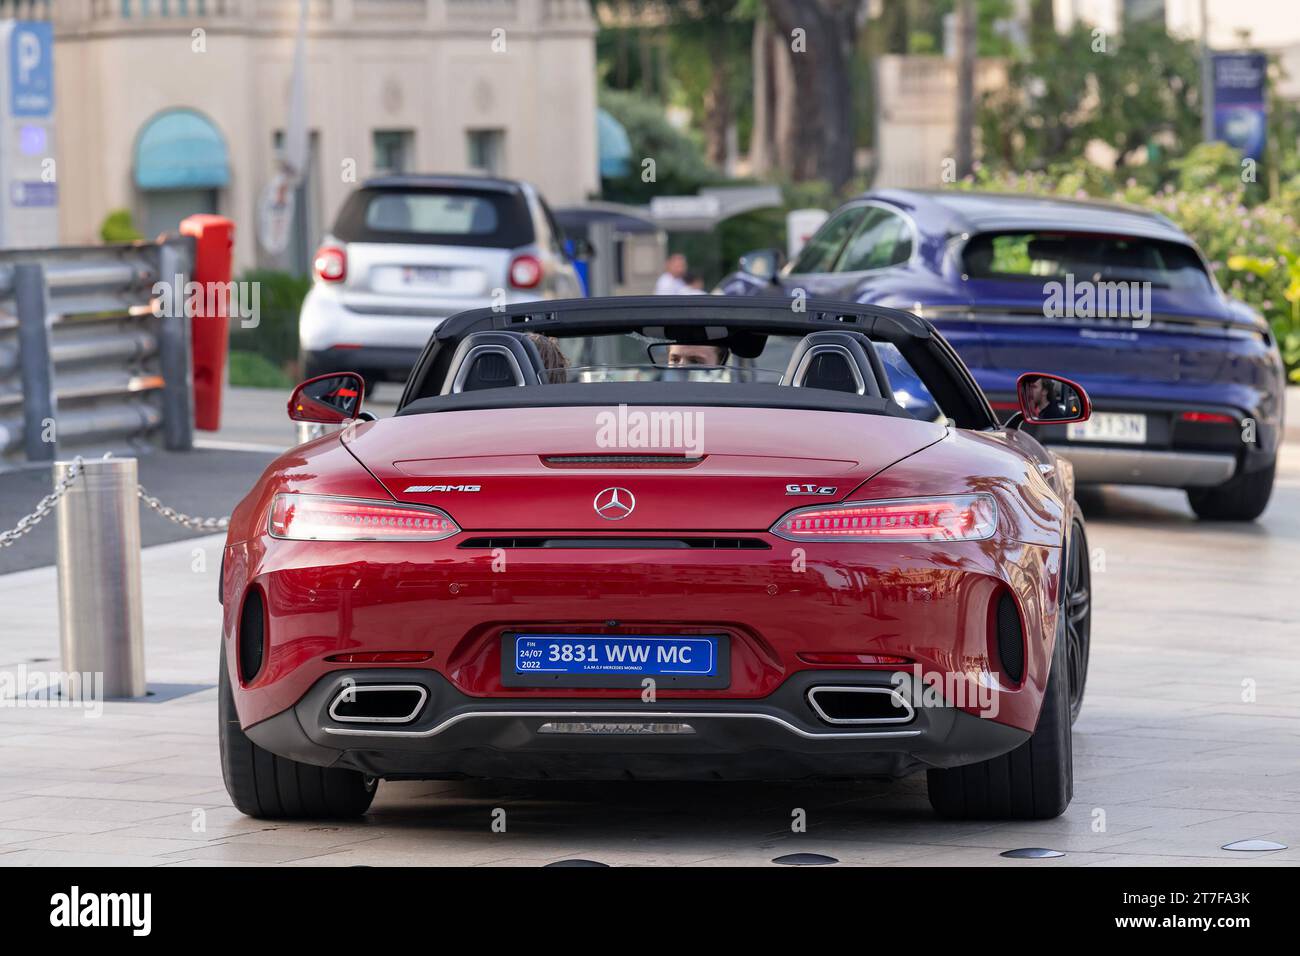 Monte Carlo, Monaco - Burgundy Mercedes-AMG GT C Roadster driving on the on Casino Square. Stock Photo